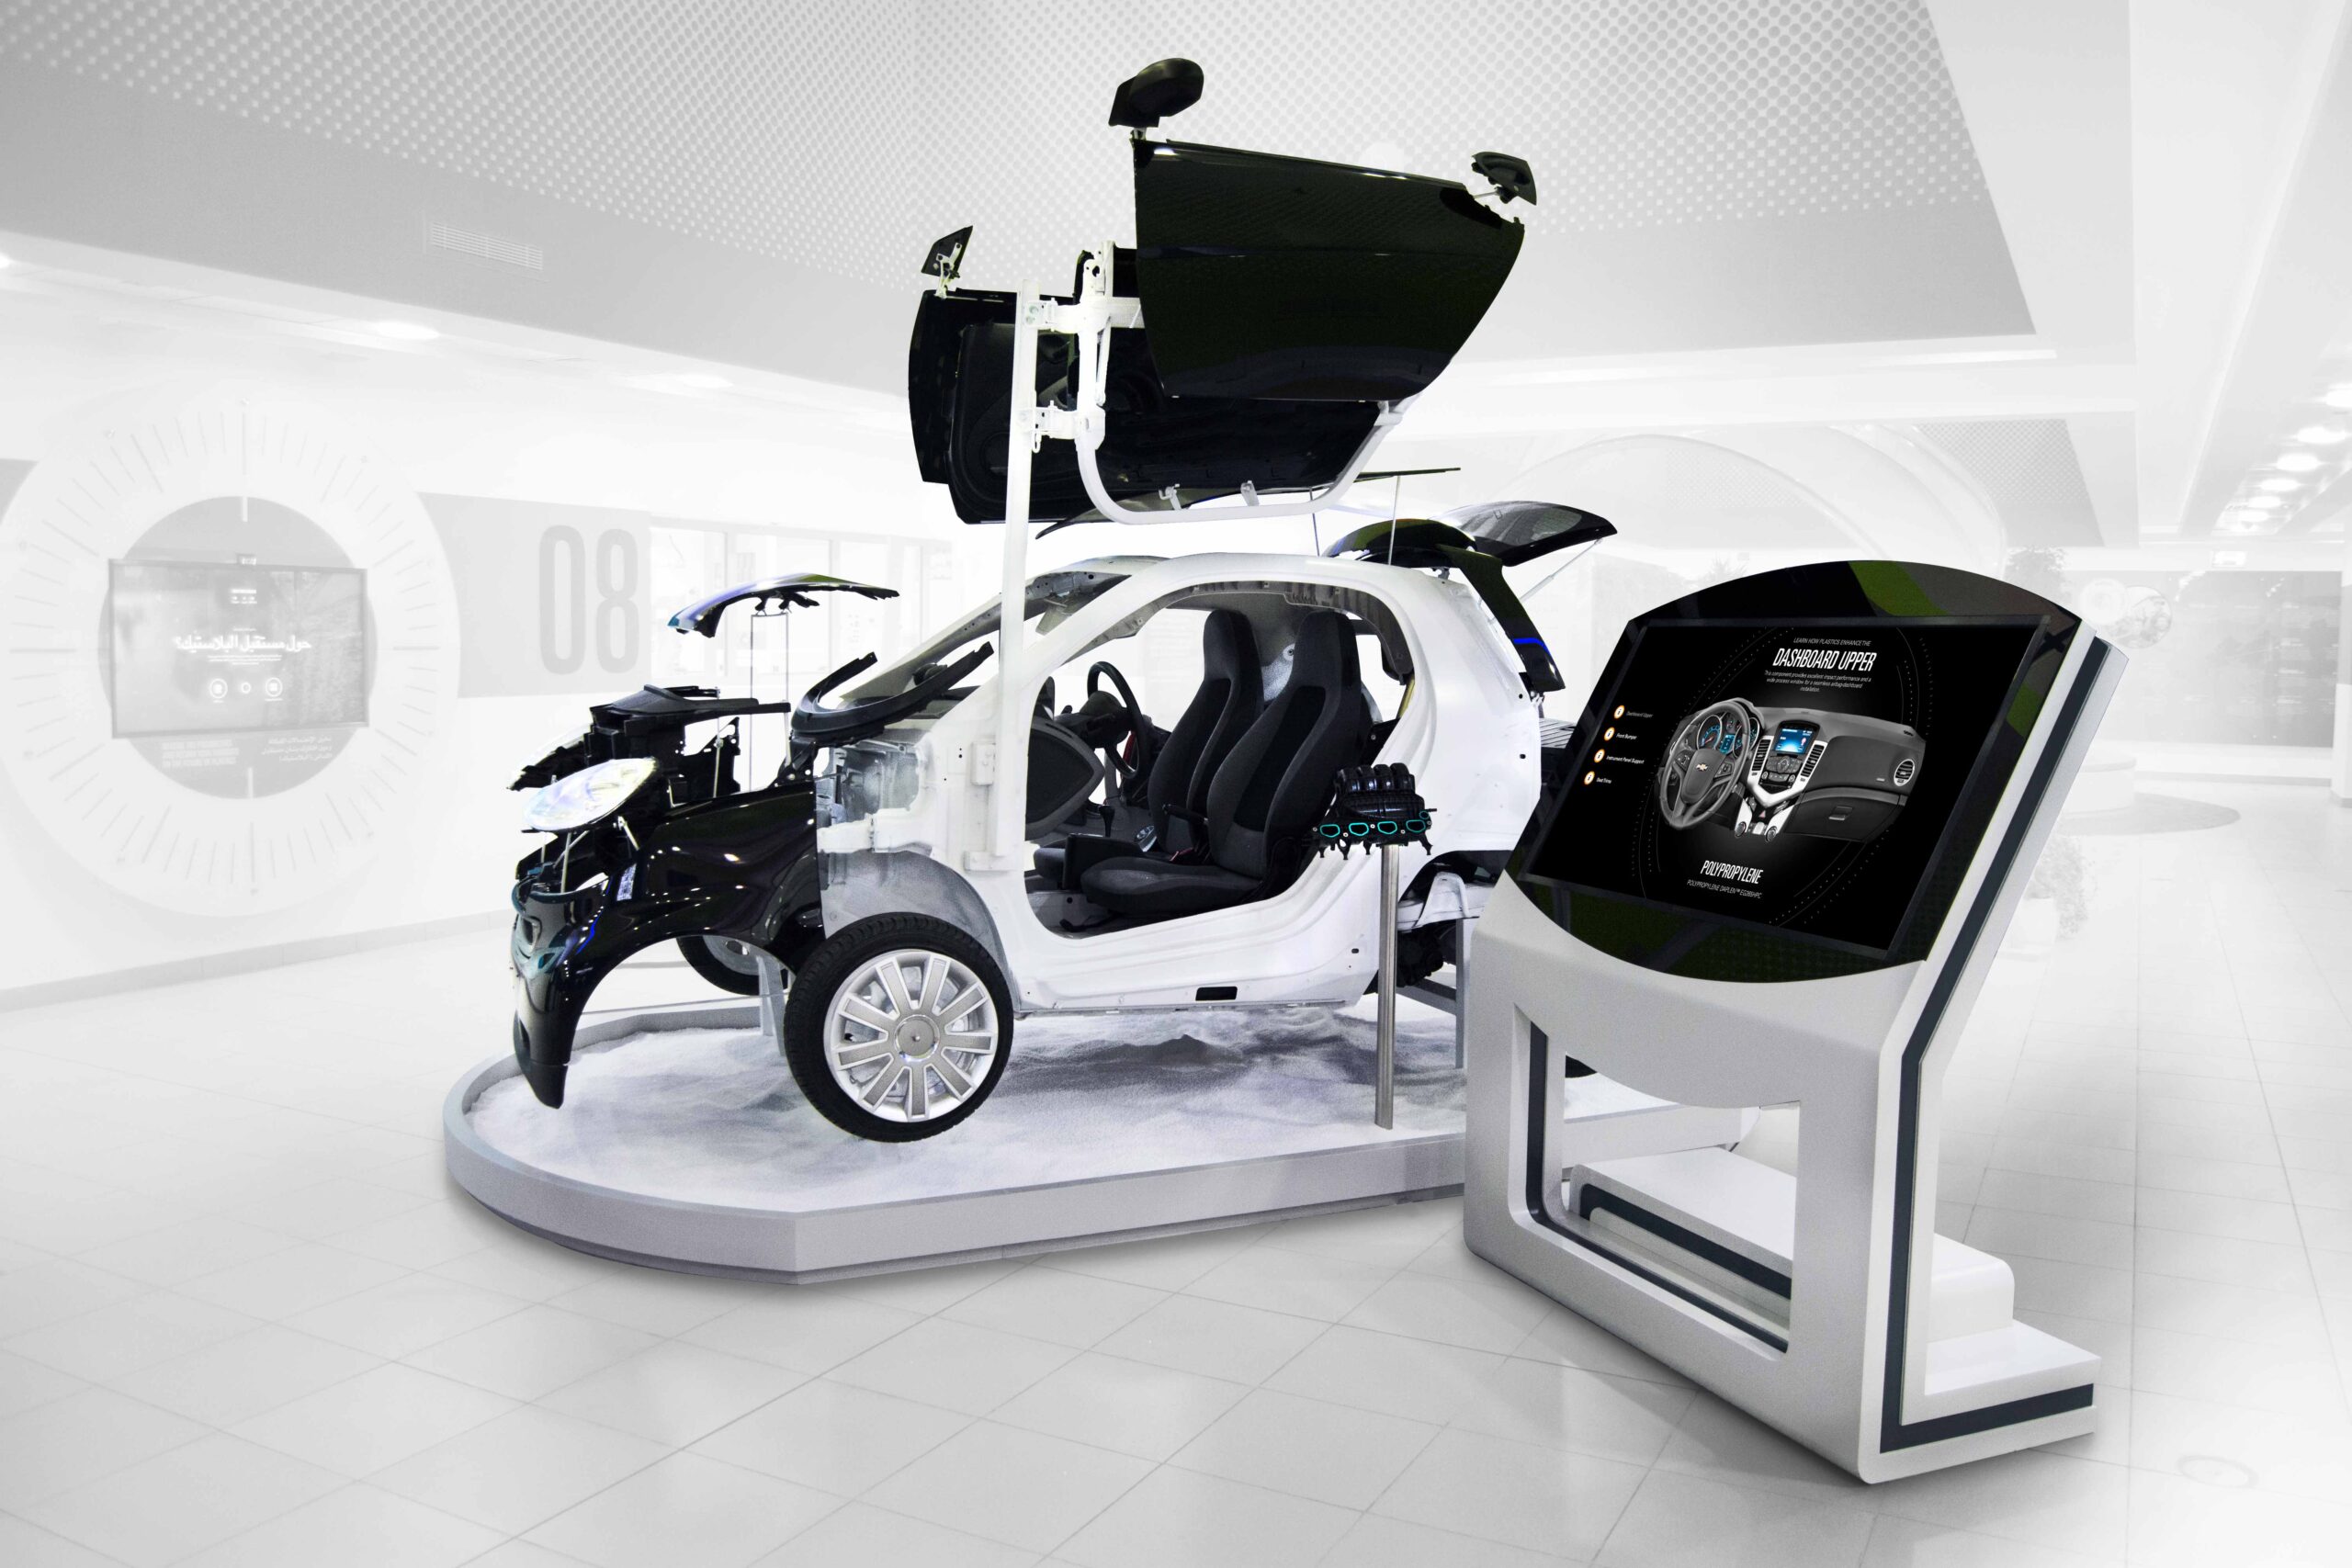 A multimedia life-size car that highlights plastic components using an interactive kiosk